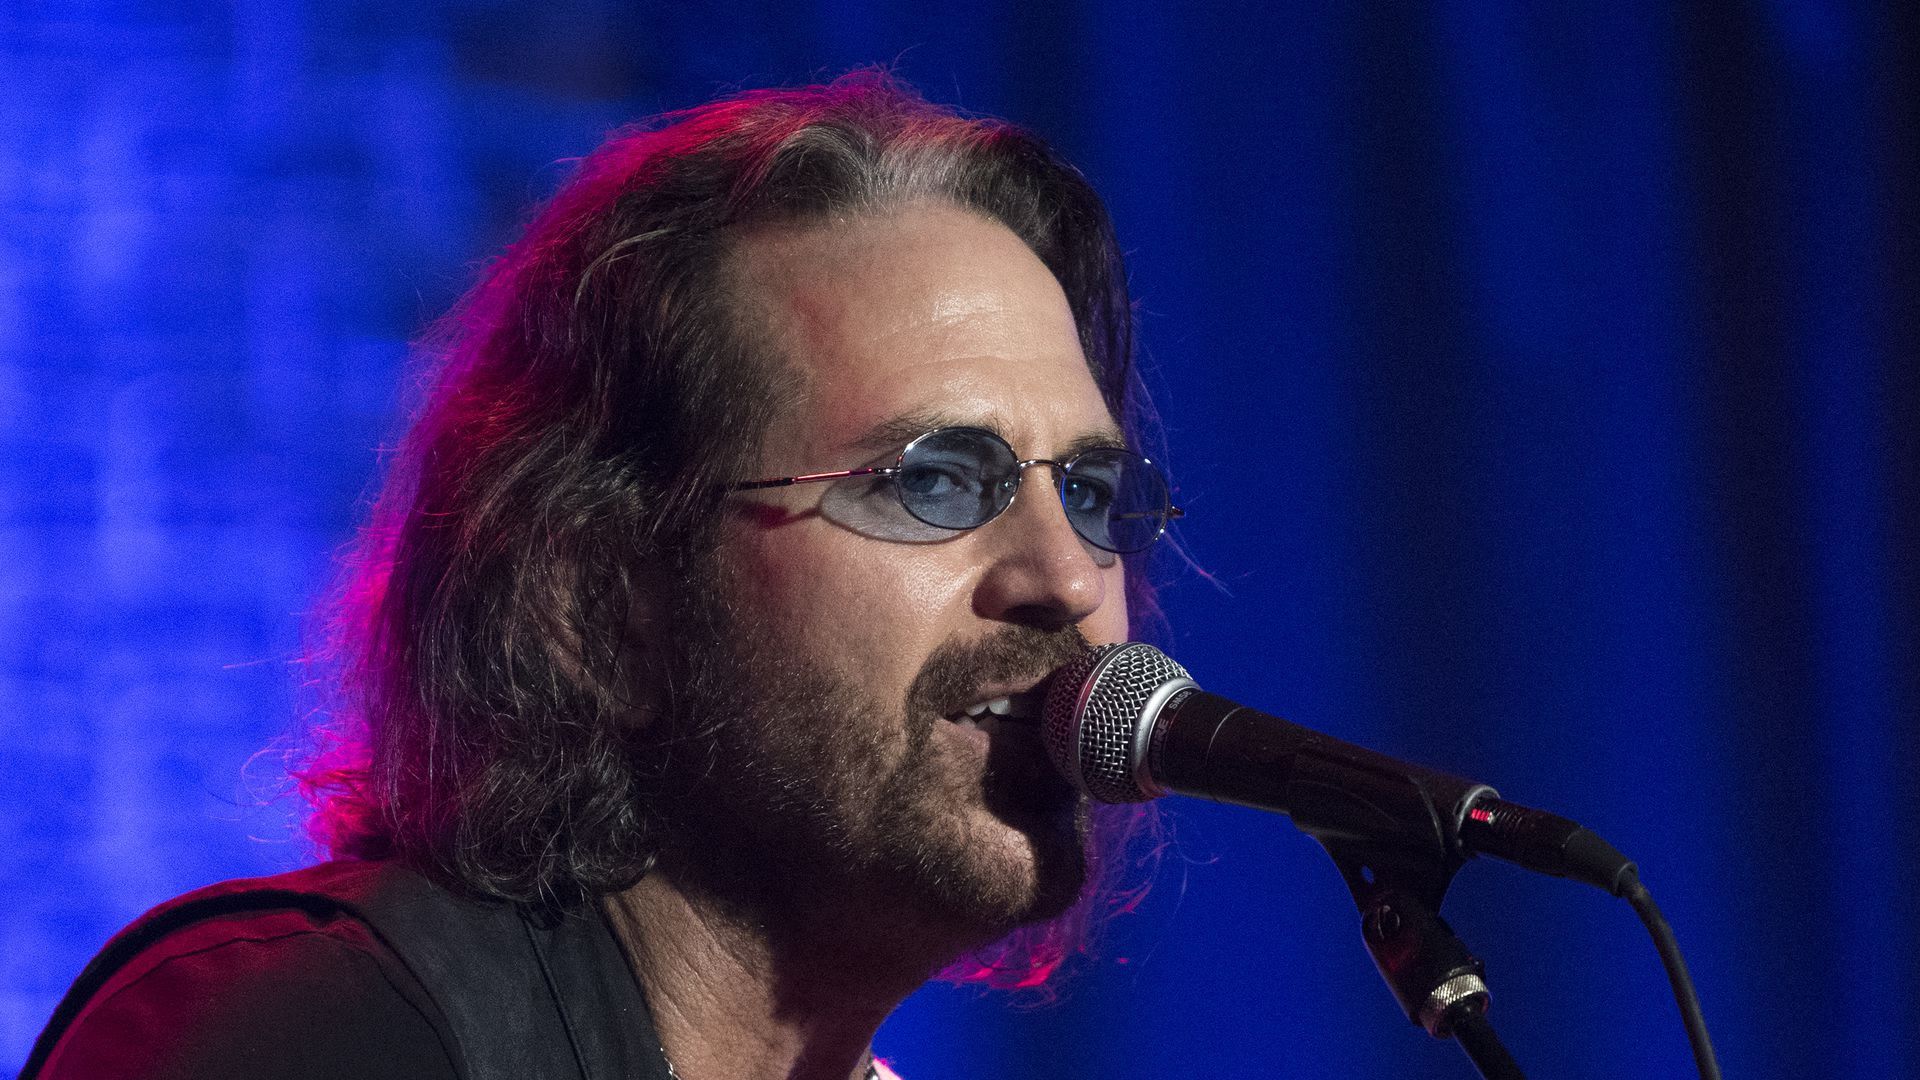 Kip Winger singing into a microphone 